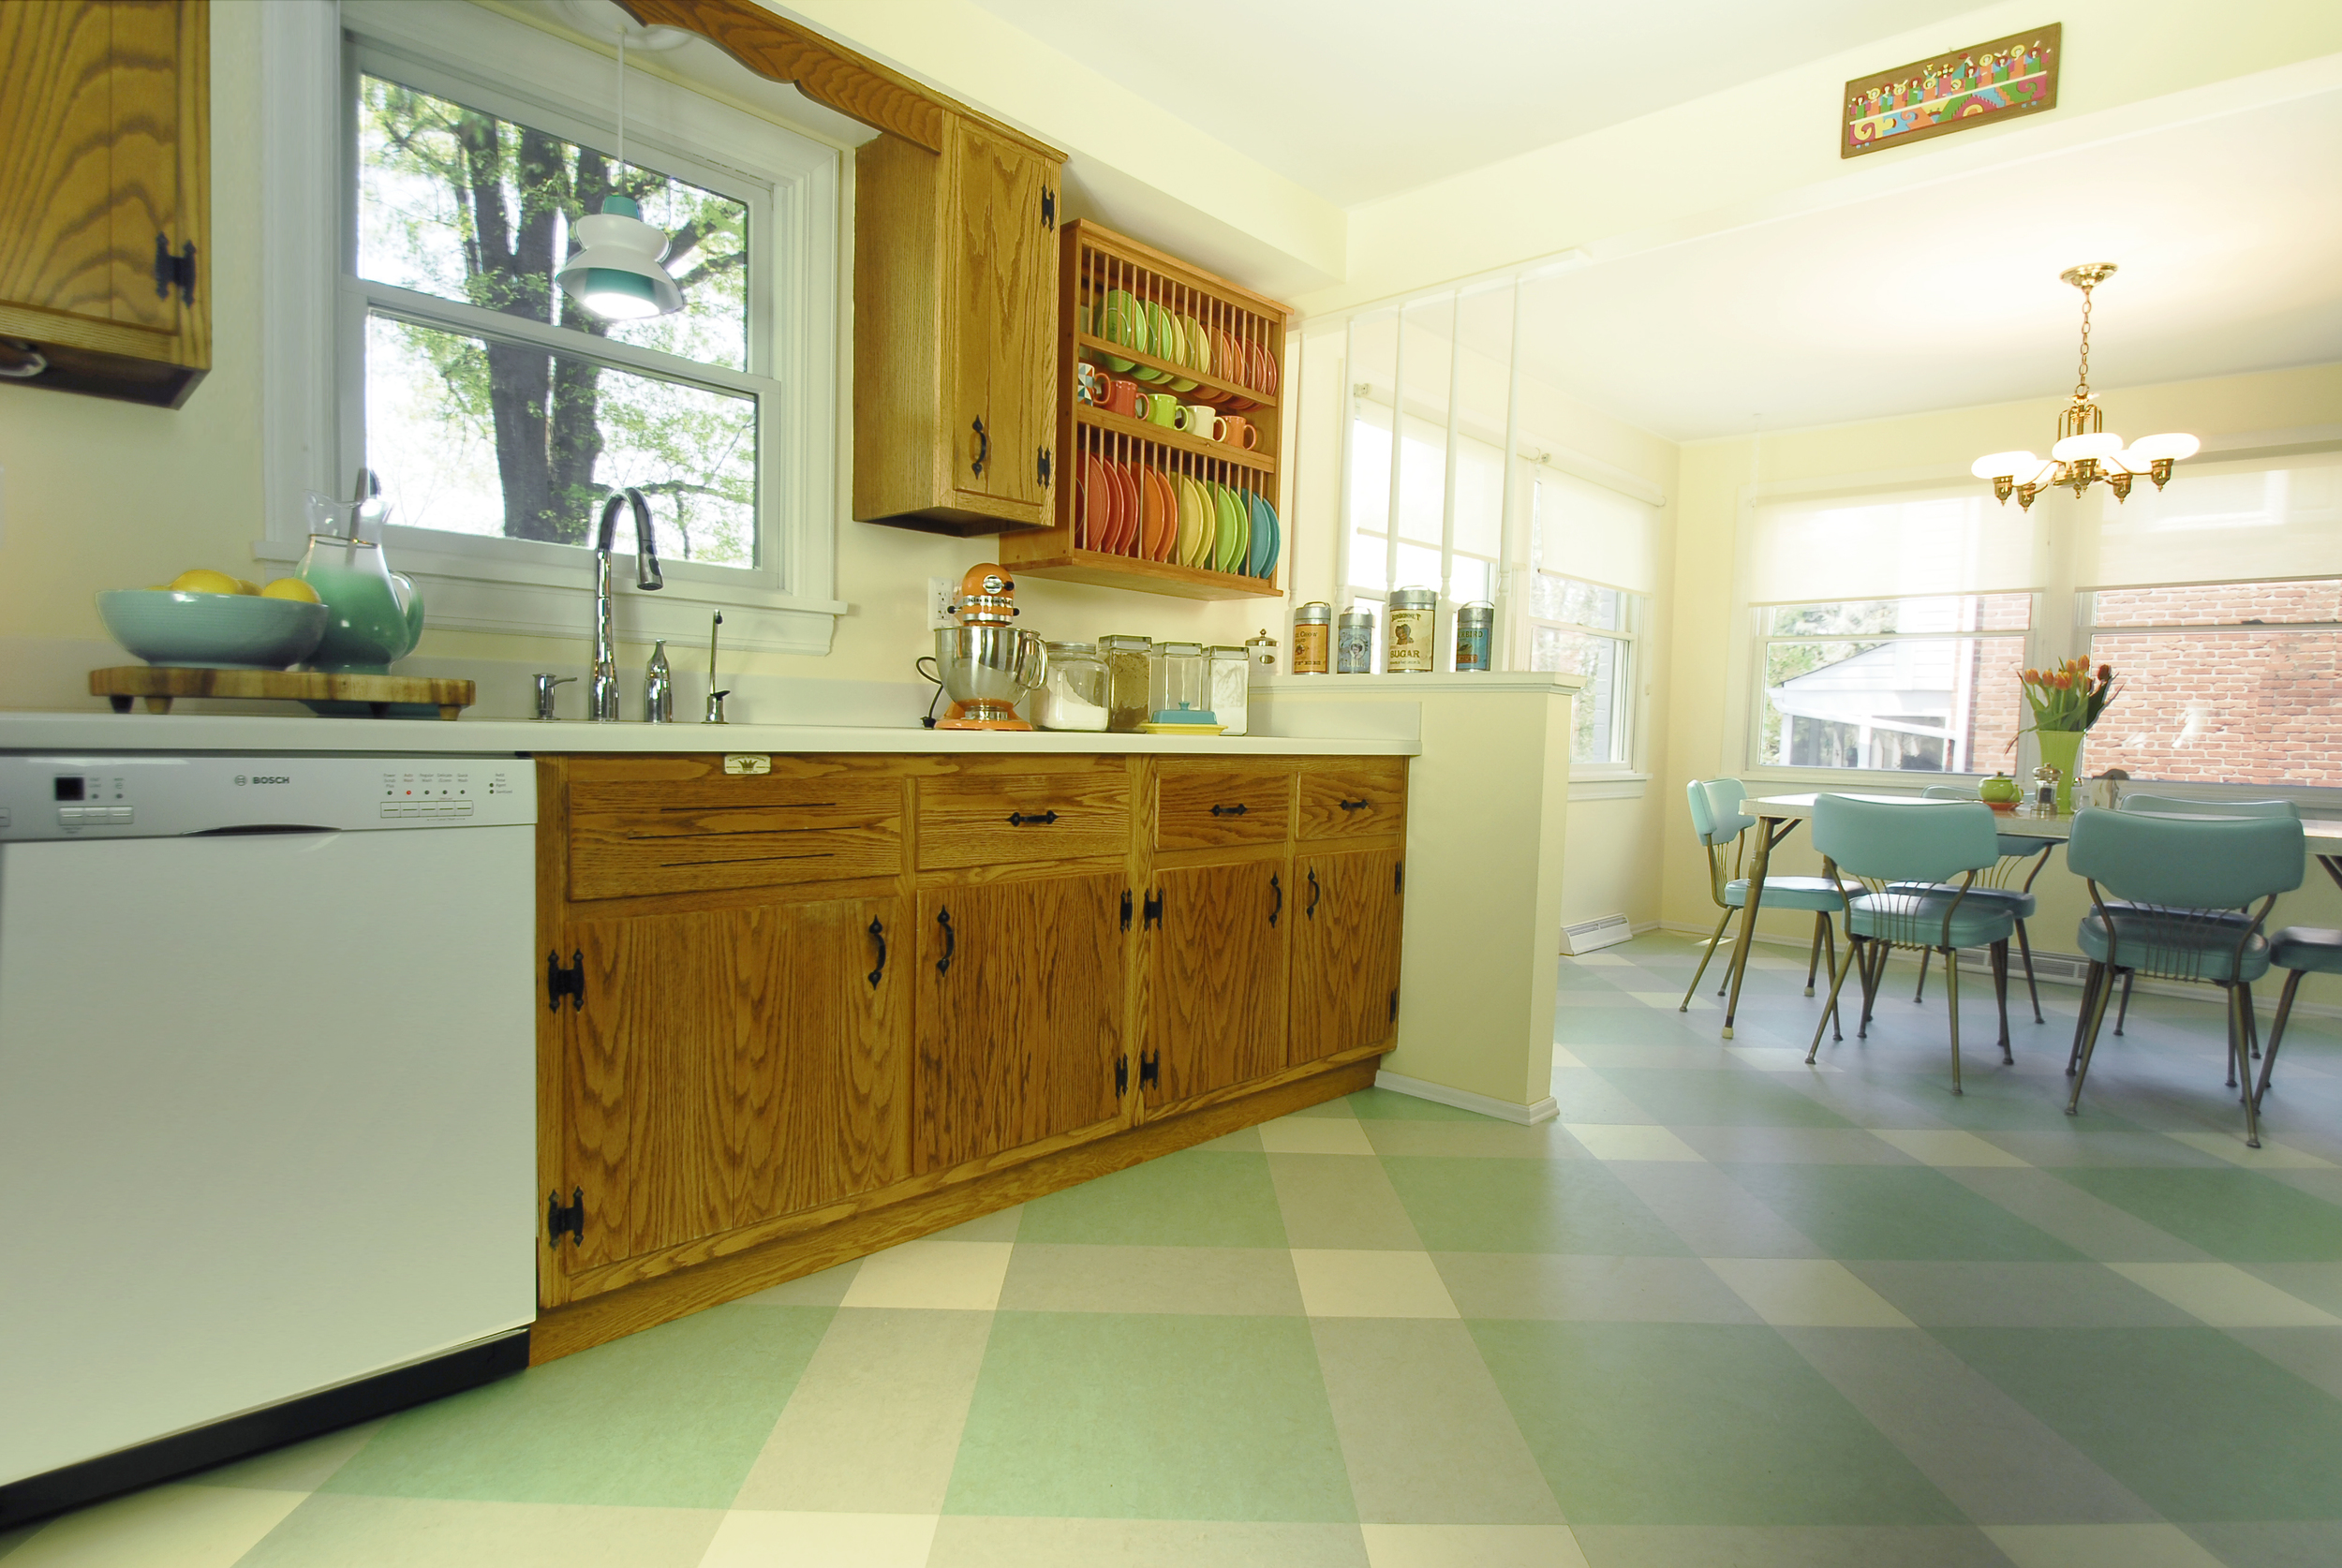 AFTER: New flooring pattern complements the retro style